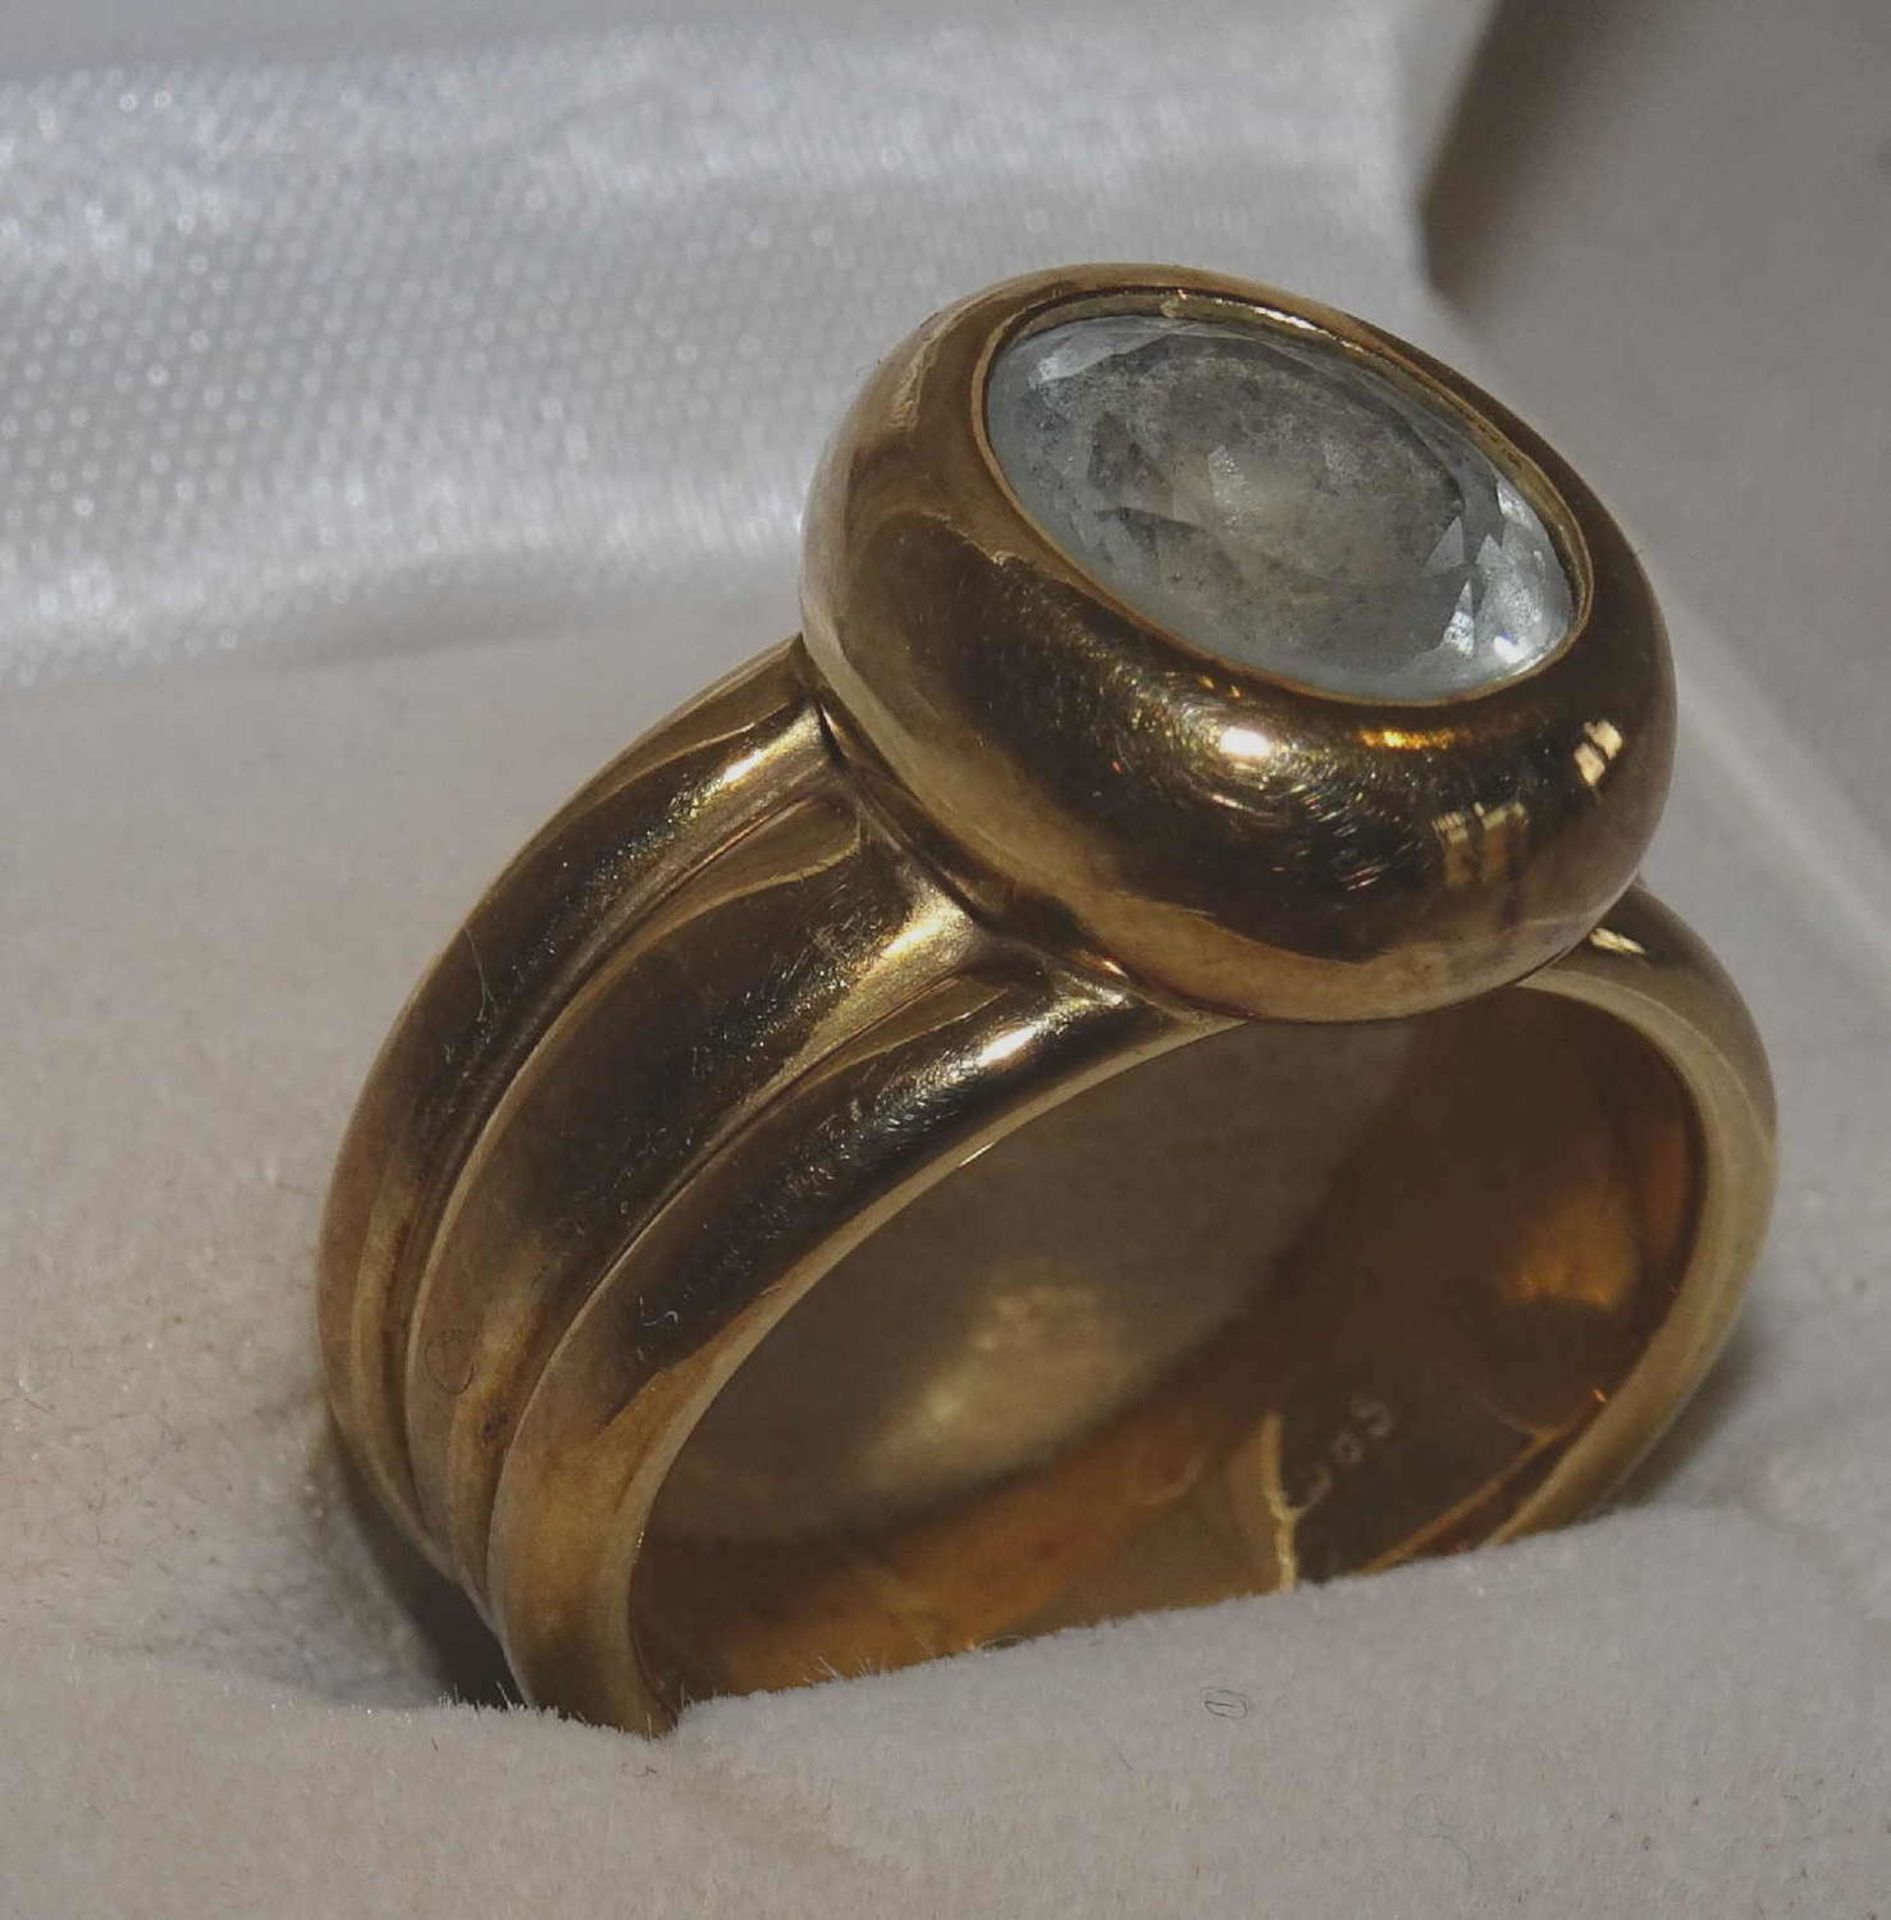 Women's ring, 585 gold, set with 1 aquamarine. Manual work. Ring size 54.Weight approx. 14.4 - Bild 2 aus 2